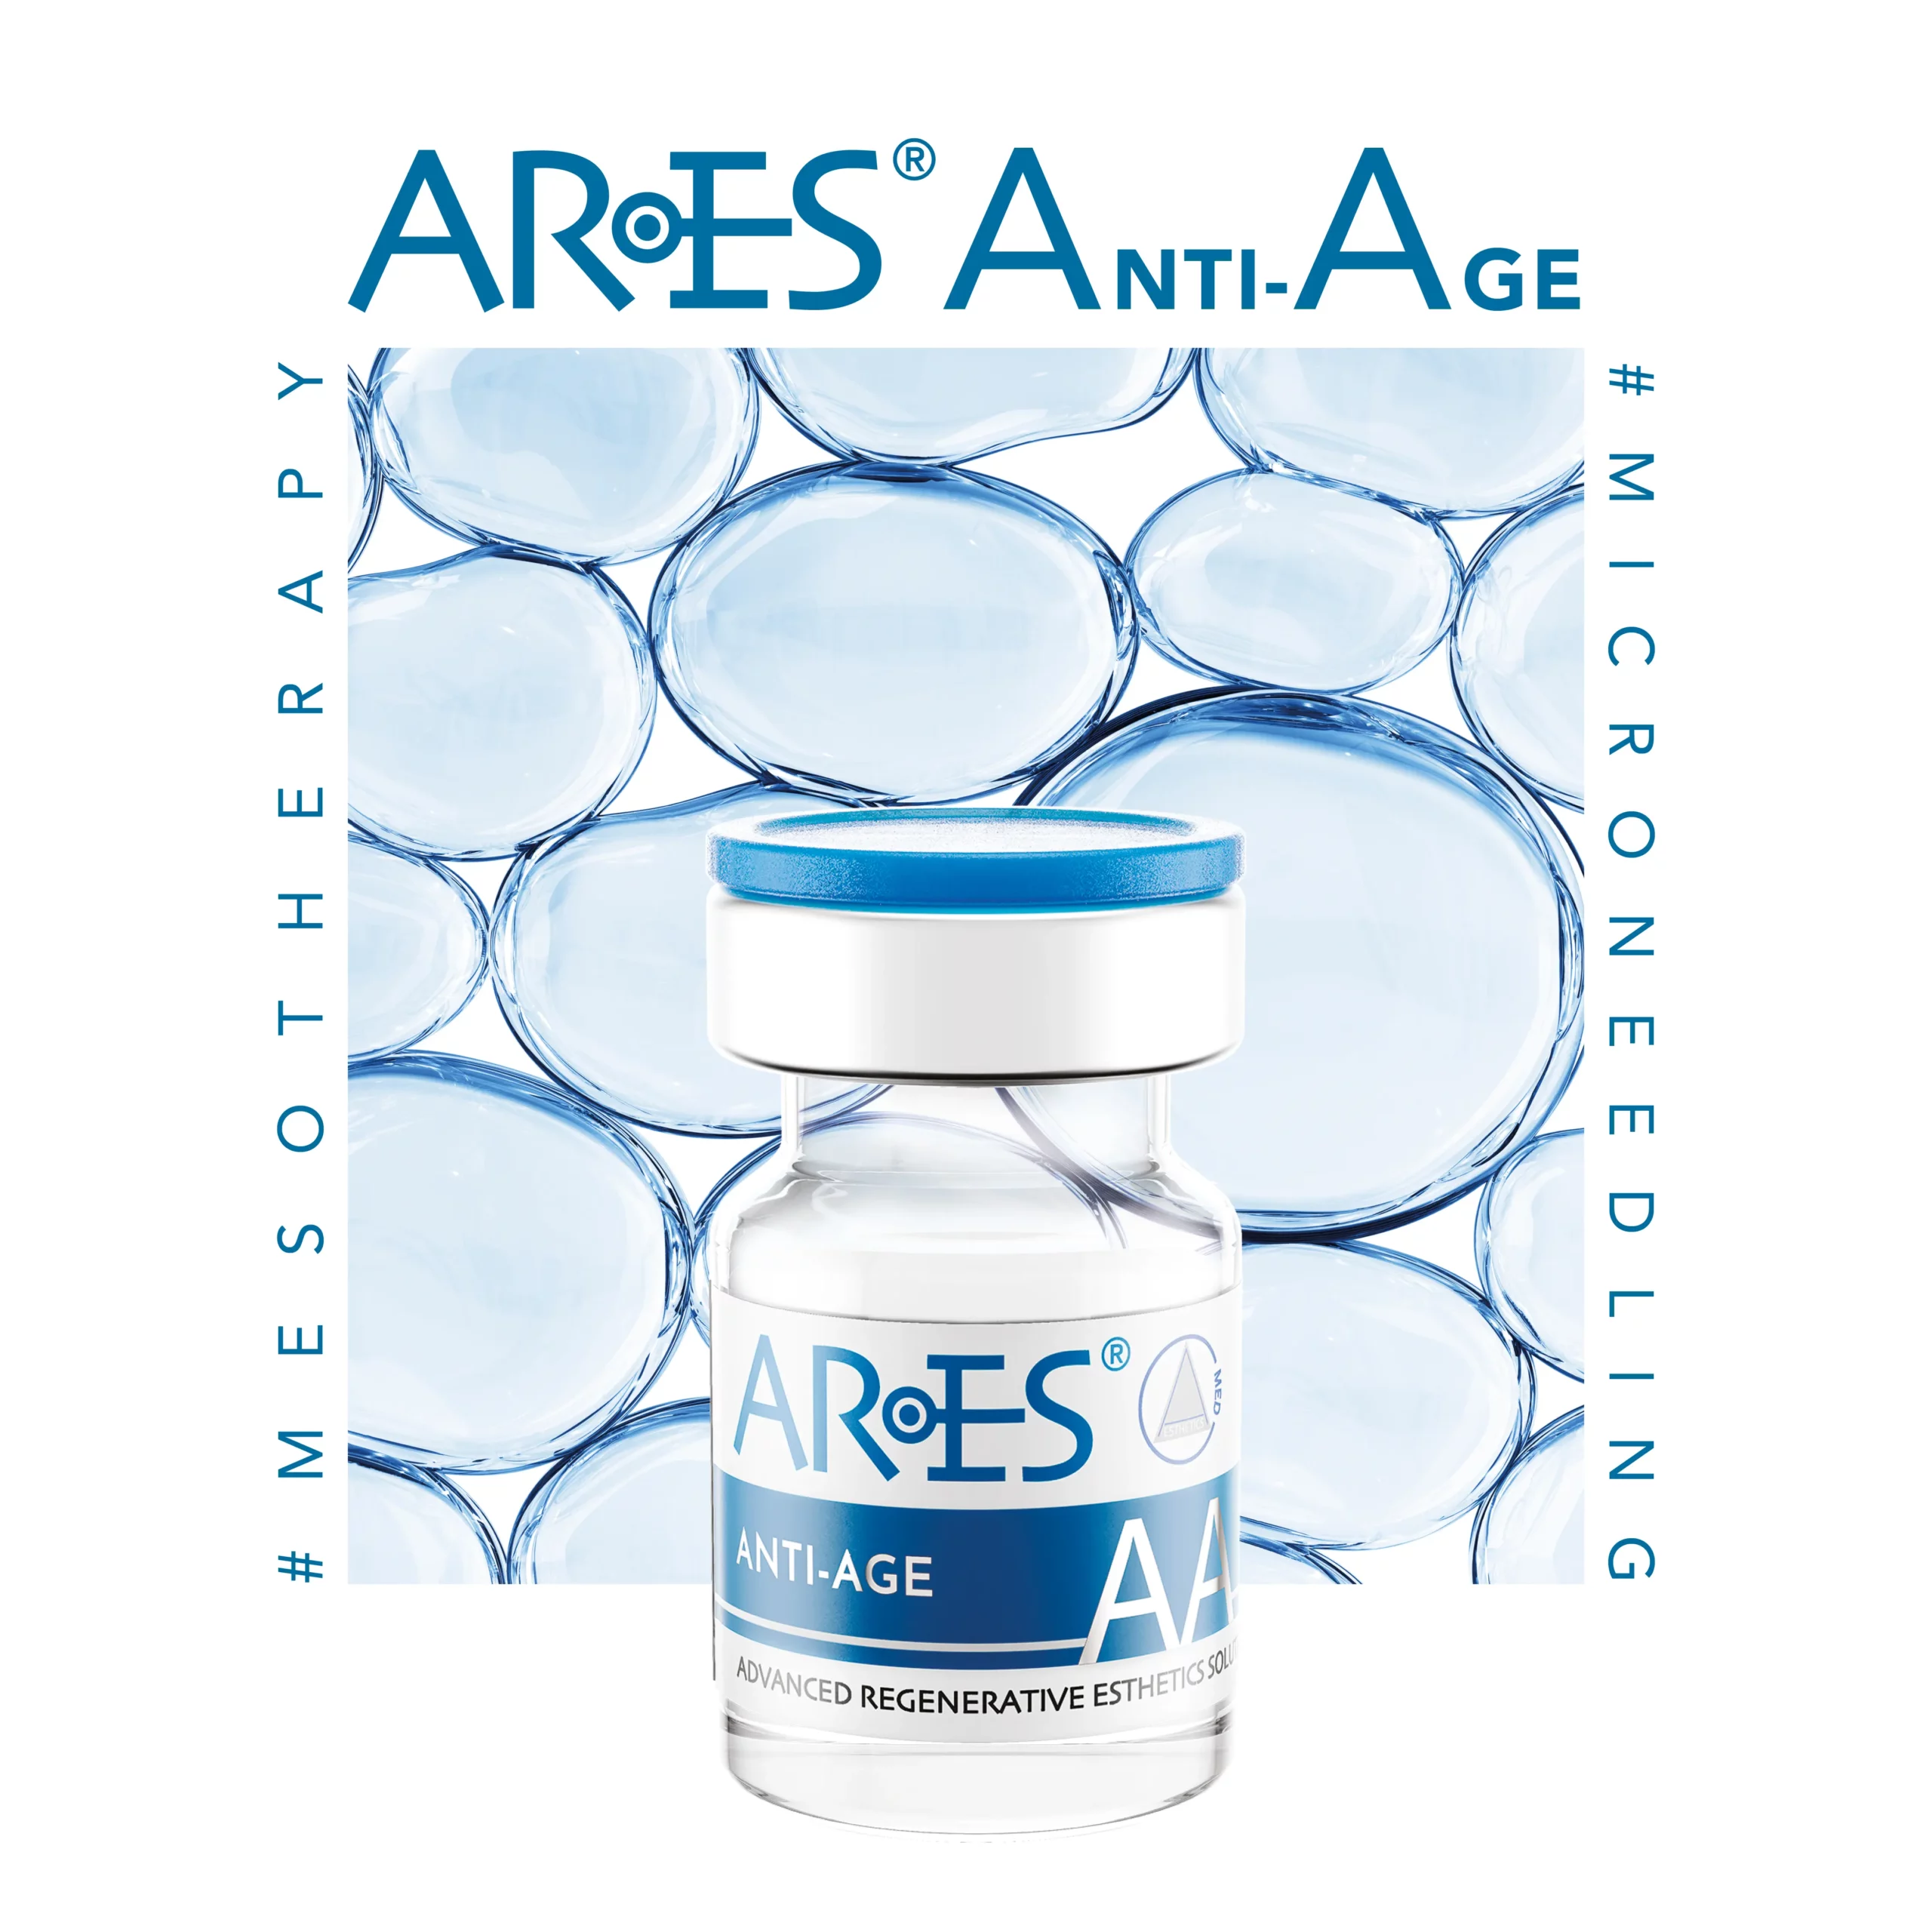 Ares-AA